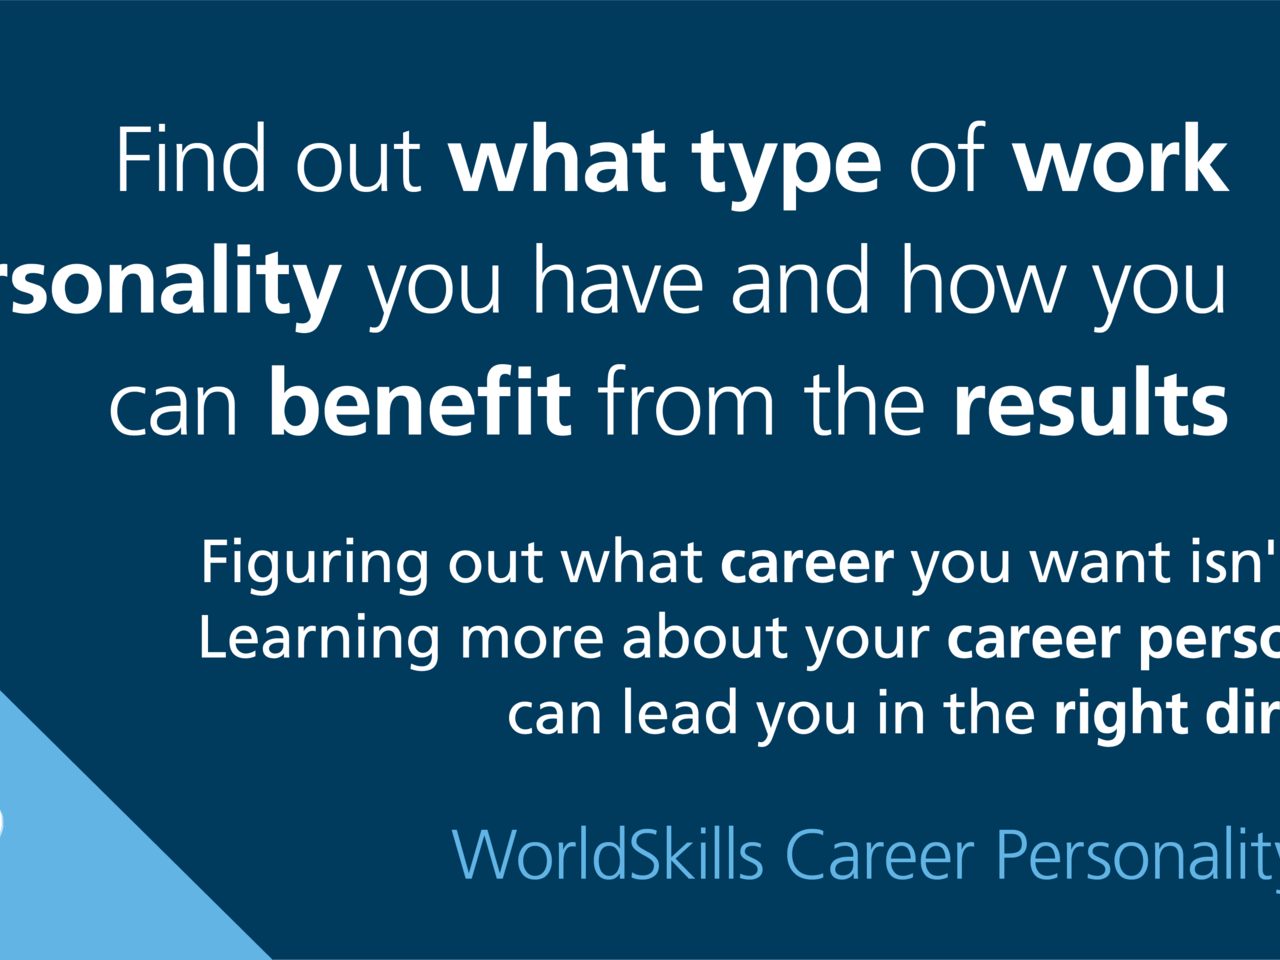 Career Personality Quiz encourages youth to discover where their interests can lead